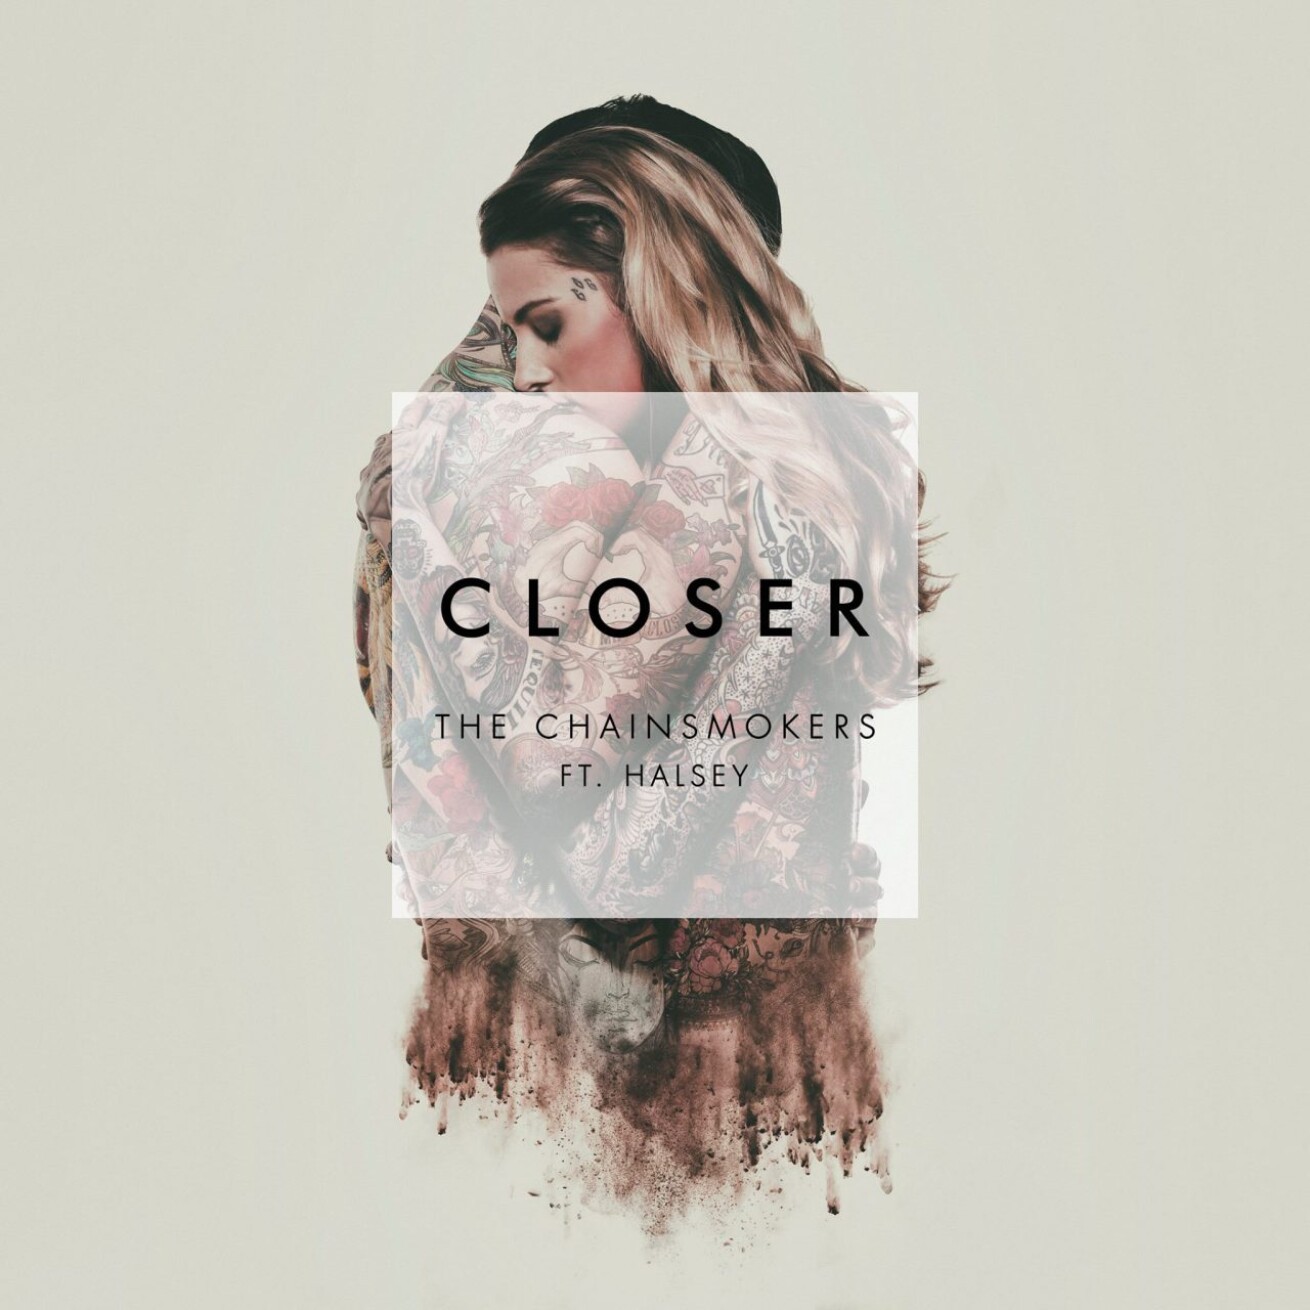 Iflyer The Two Artists Credited For The Chainsmokers Closer